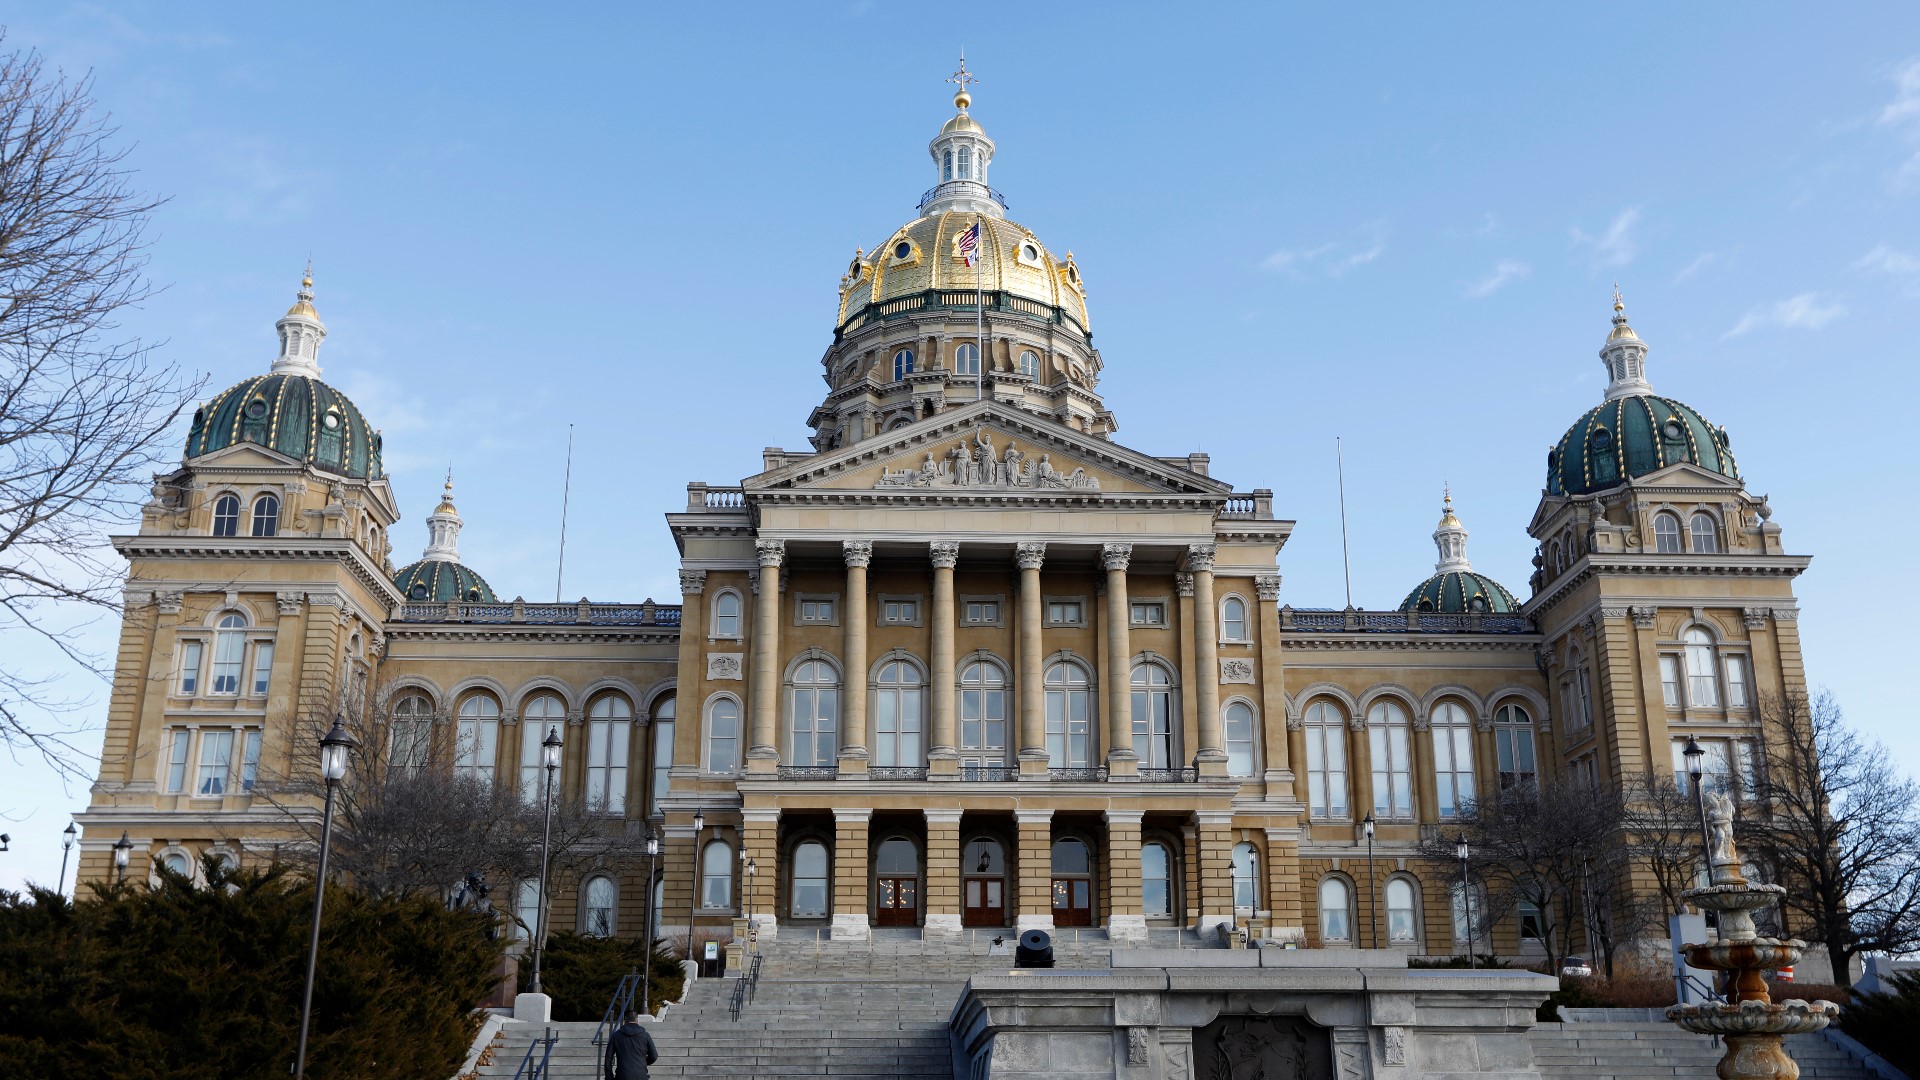 The money will still be used in Iowa, at the governor's discretion. The Treasury Department determined using it for IT expenses was not allowable.